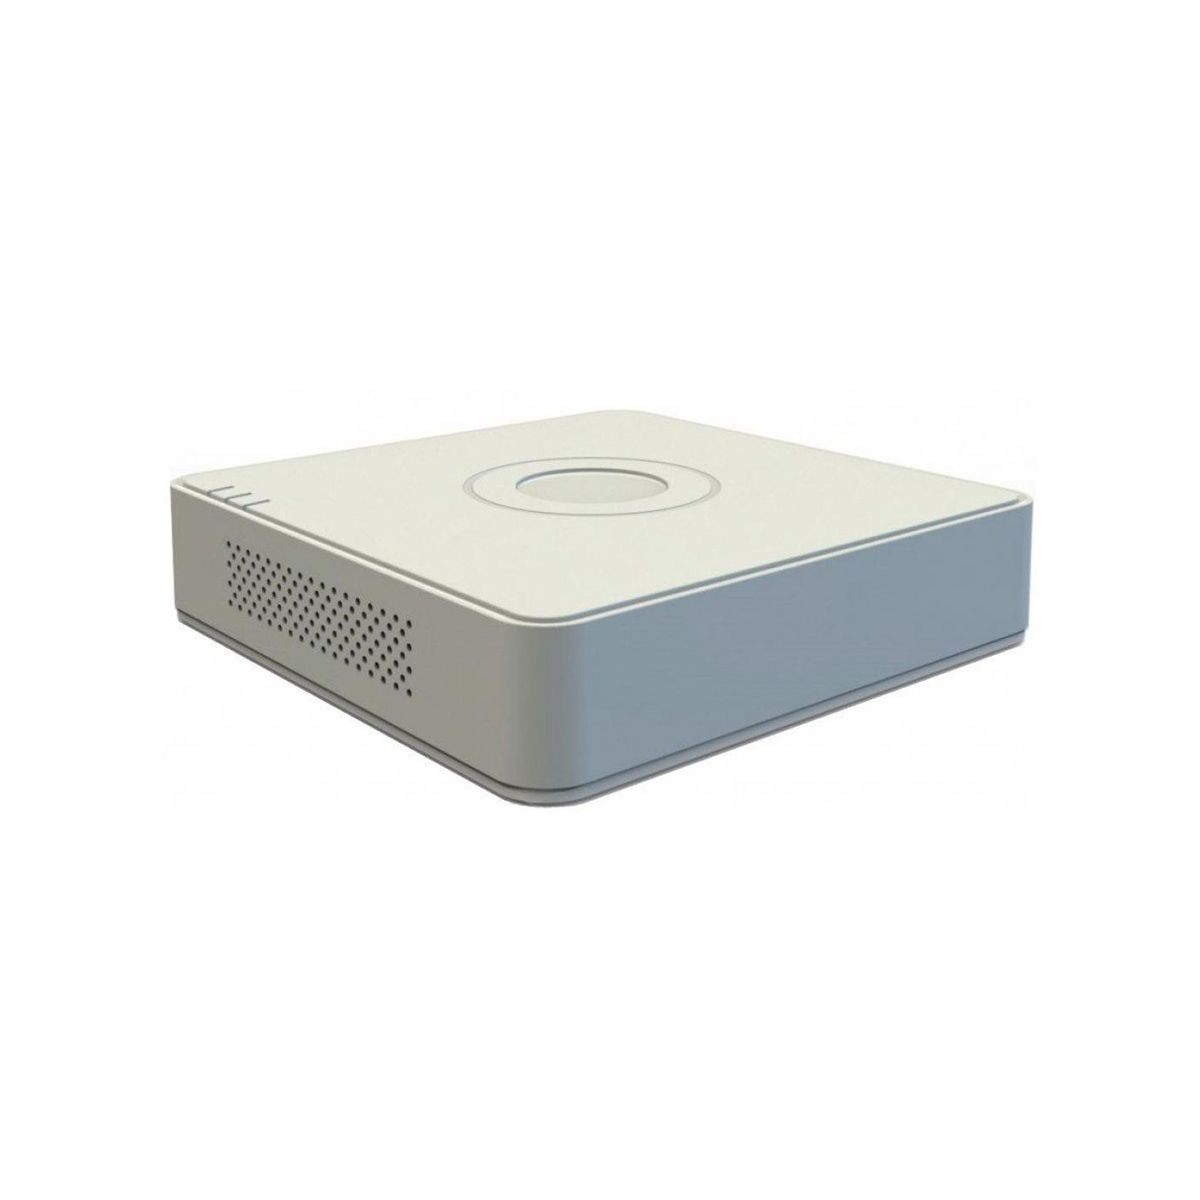 NVR Hikvision 4 canales DS-7104NI-E1